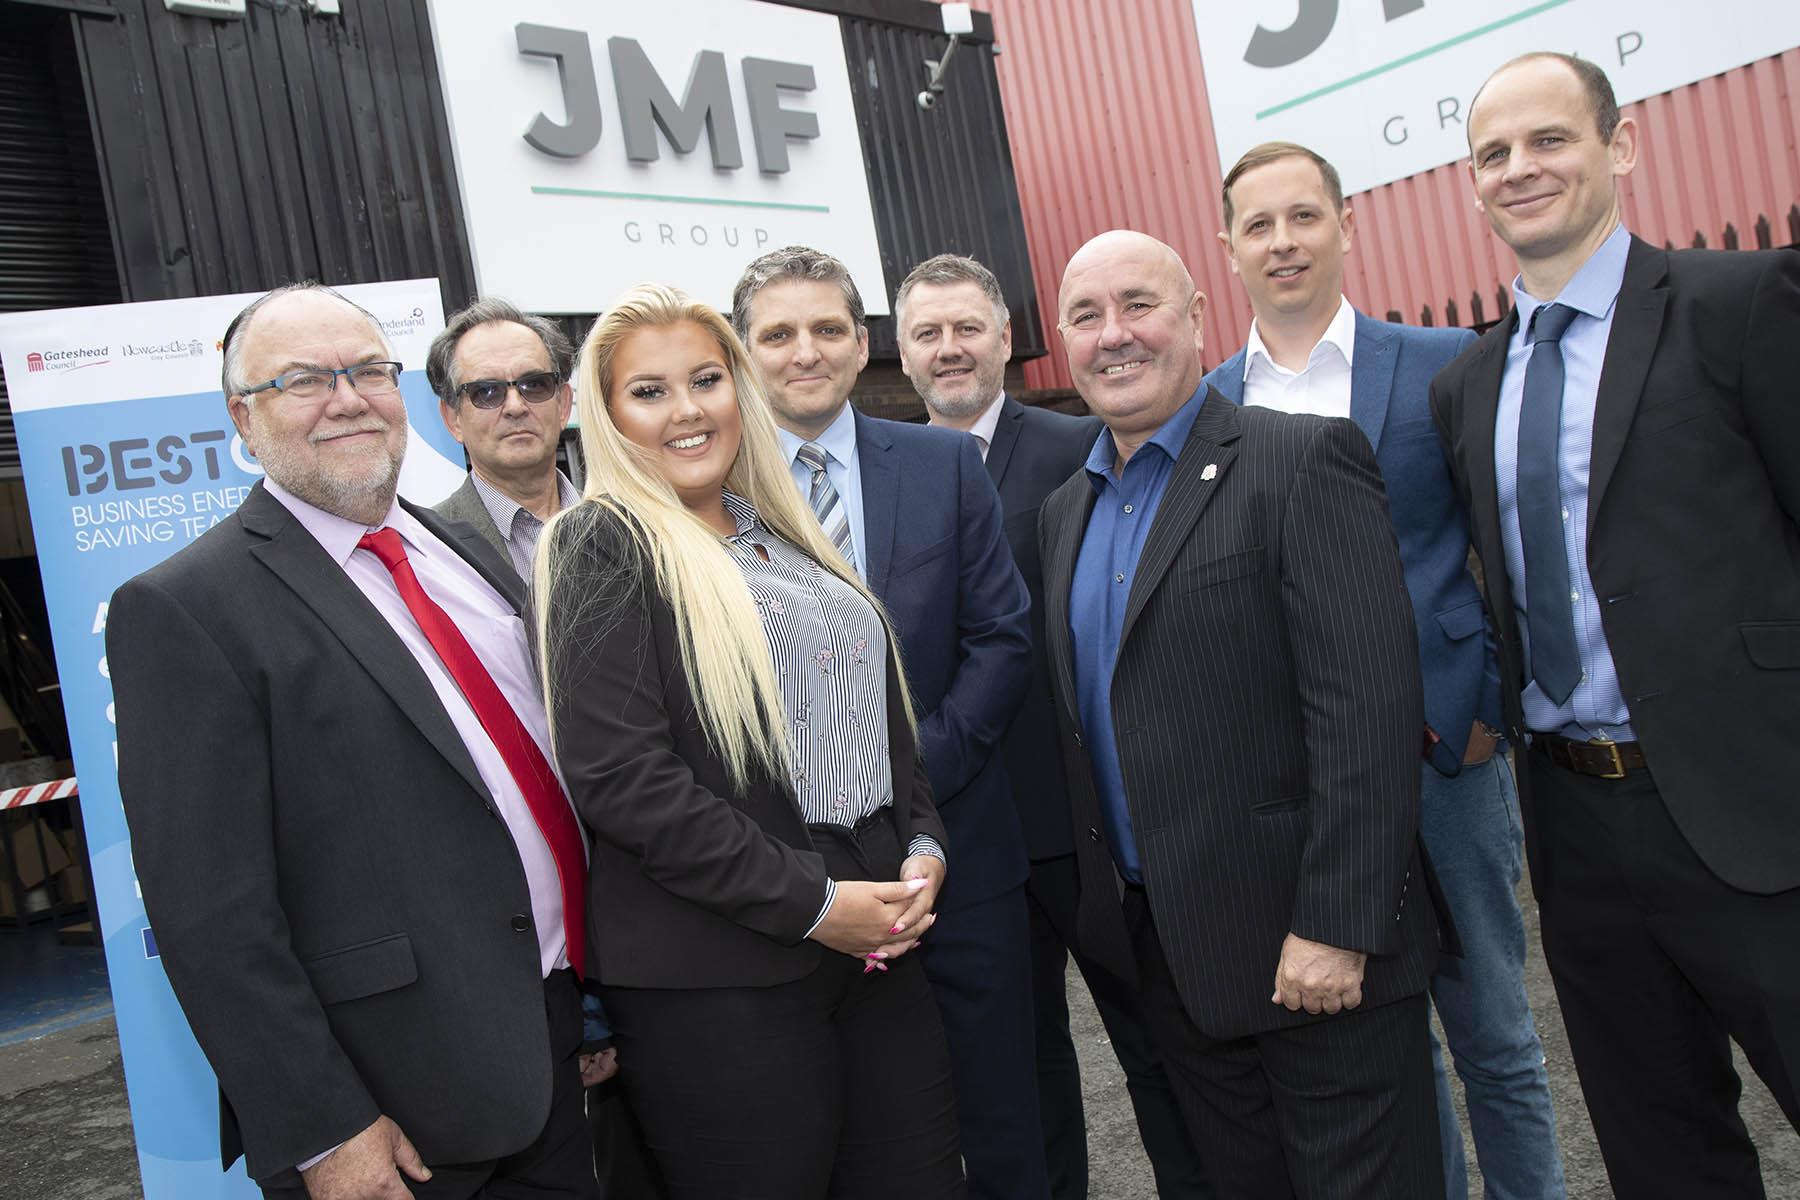 Newcastle and Gateshead councillors with JMF Group. 